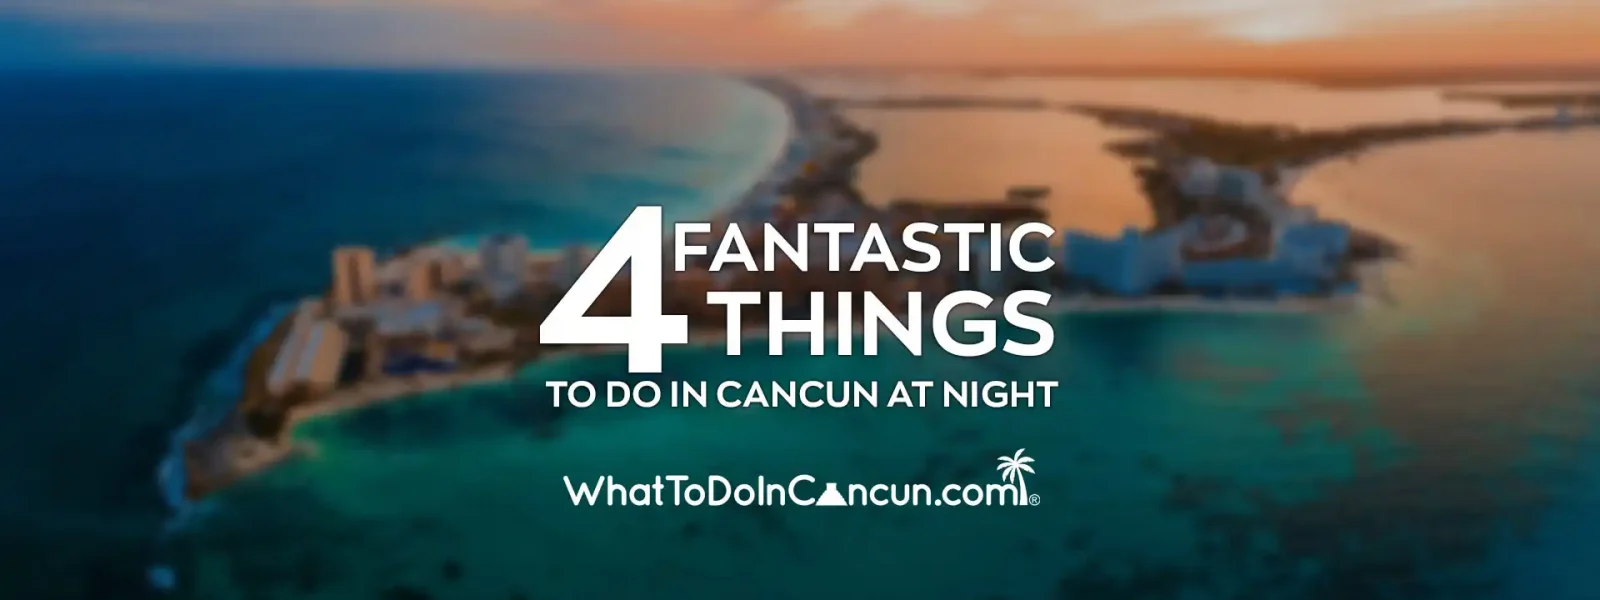 4 fantastic things to do in cancun at night